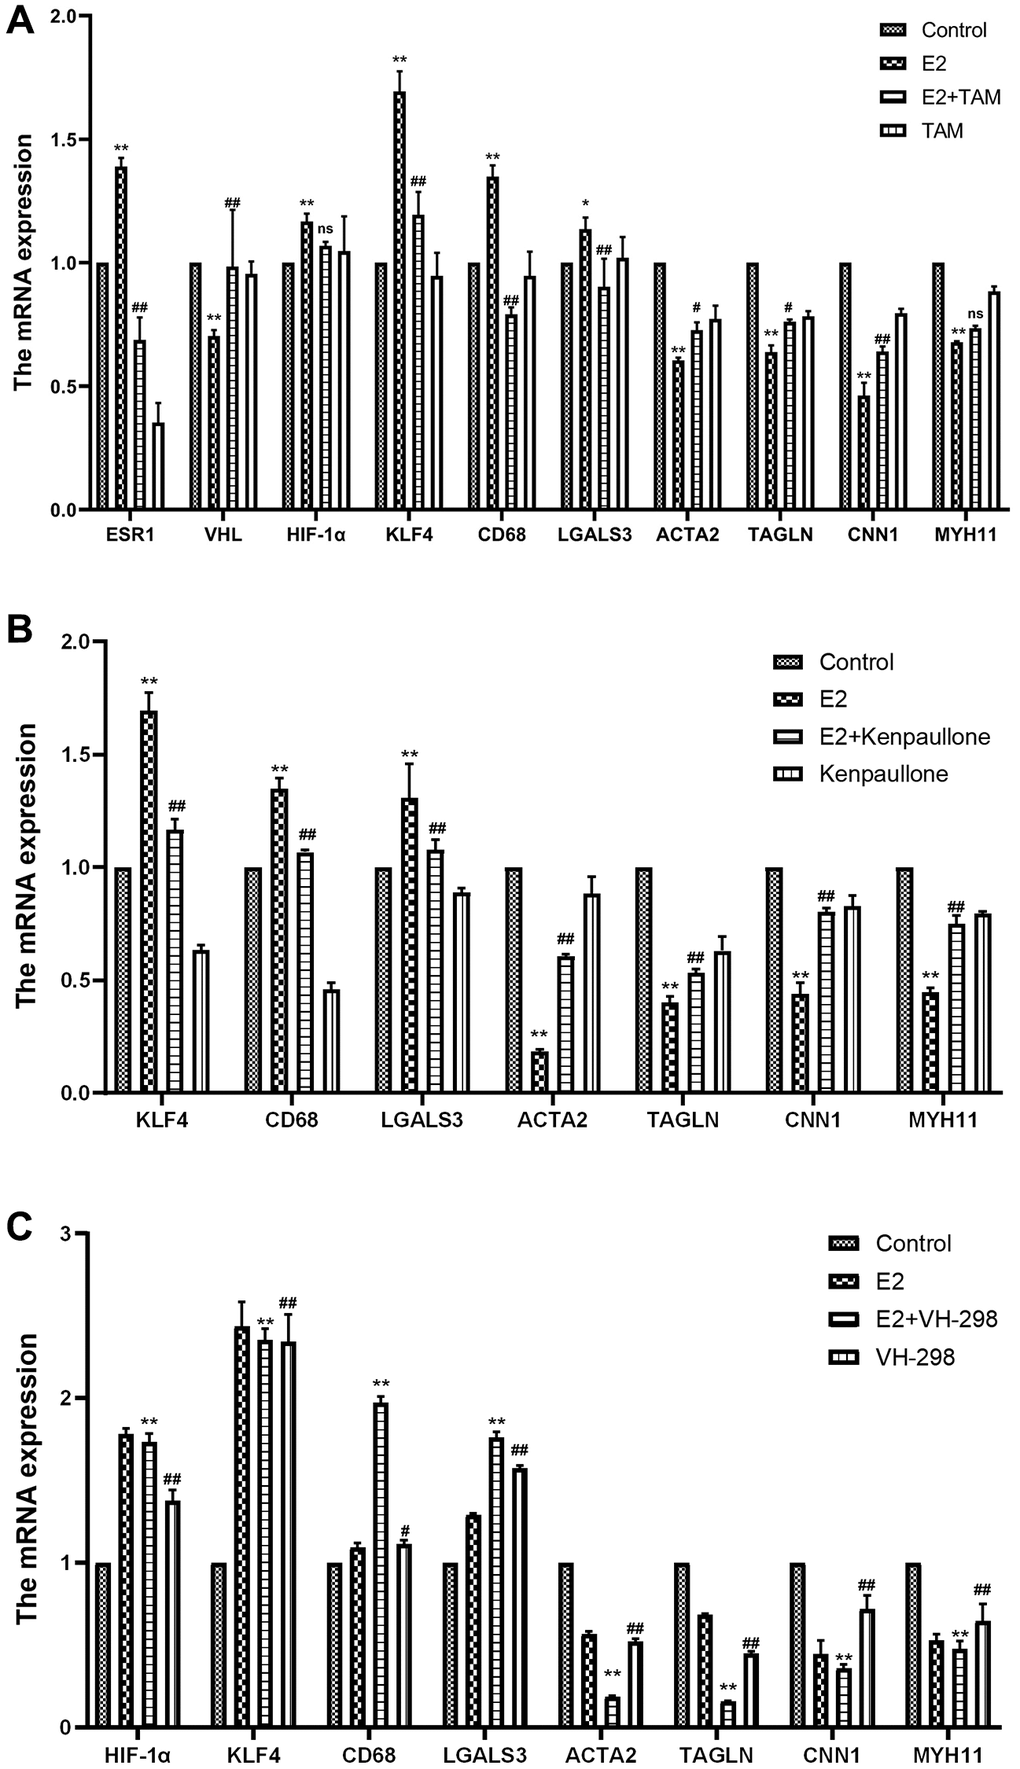 Effect of high-dose estrogen on the expression of MOVAS cell markers. (A) MOVAS cells were treated with 10 μM E2 with or without TAM. After 4 days, the contraction phenotypic markers and macrophage-like phenotypic markers of MOVAS cells were detected by qRT-PCR as well as the mRNA expression of related cellular pathways (n = 4). (B) MOVAS cells were treated with 10 μM E2 with or without kenpaullone. After 4 days, the mRNA expression levels of related genes were detected by qRT-PCR (n = 4). (C) MOVAS cells were treated with 10 μM E2 with or without VH-298 for 4 days, and the mRNA expression levels of related genes were detected by qRT-PCR (n = 4). *VS control group, *P **P #VS. E2 group, #P ##P 